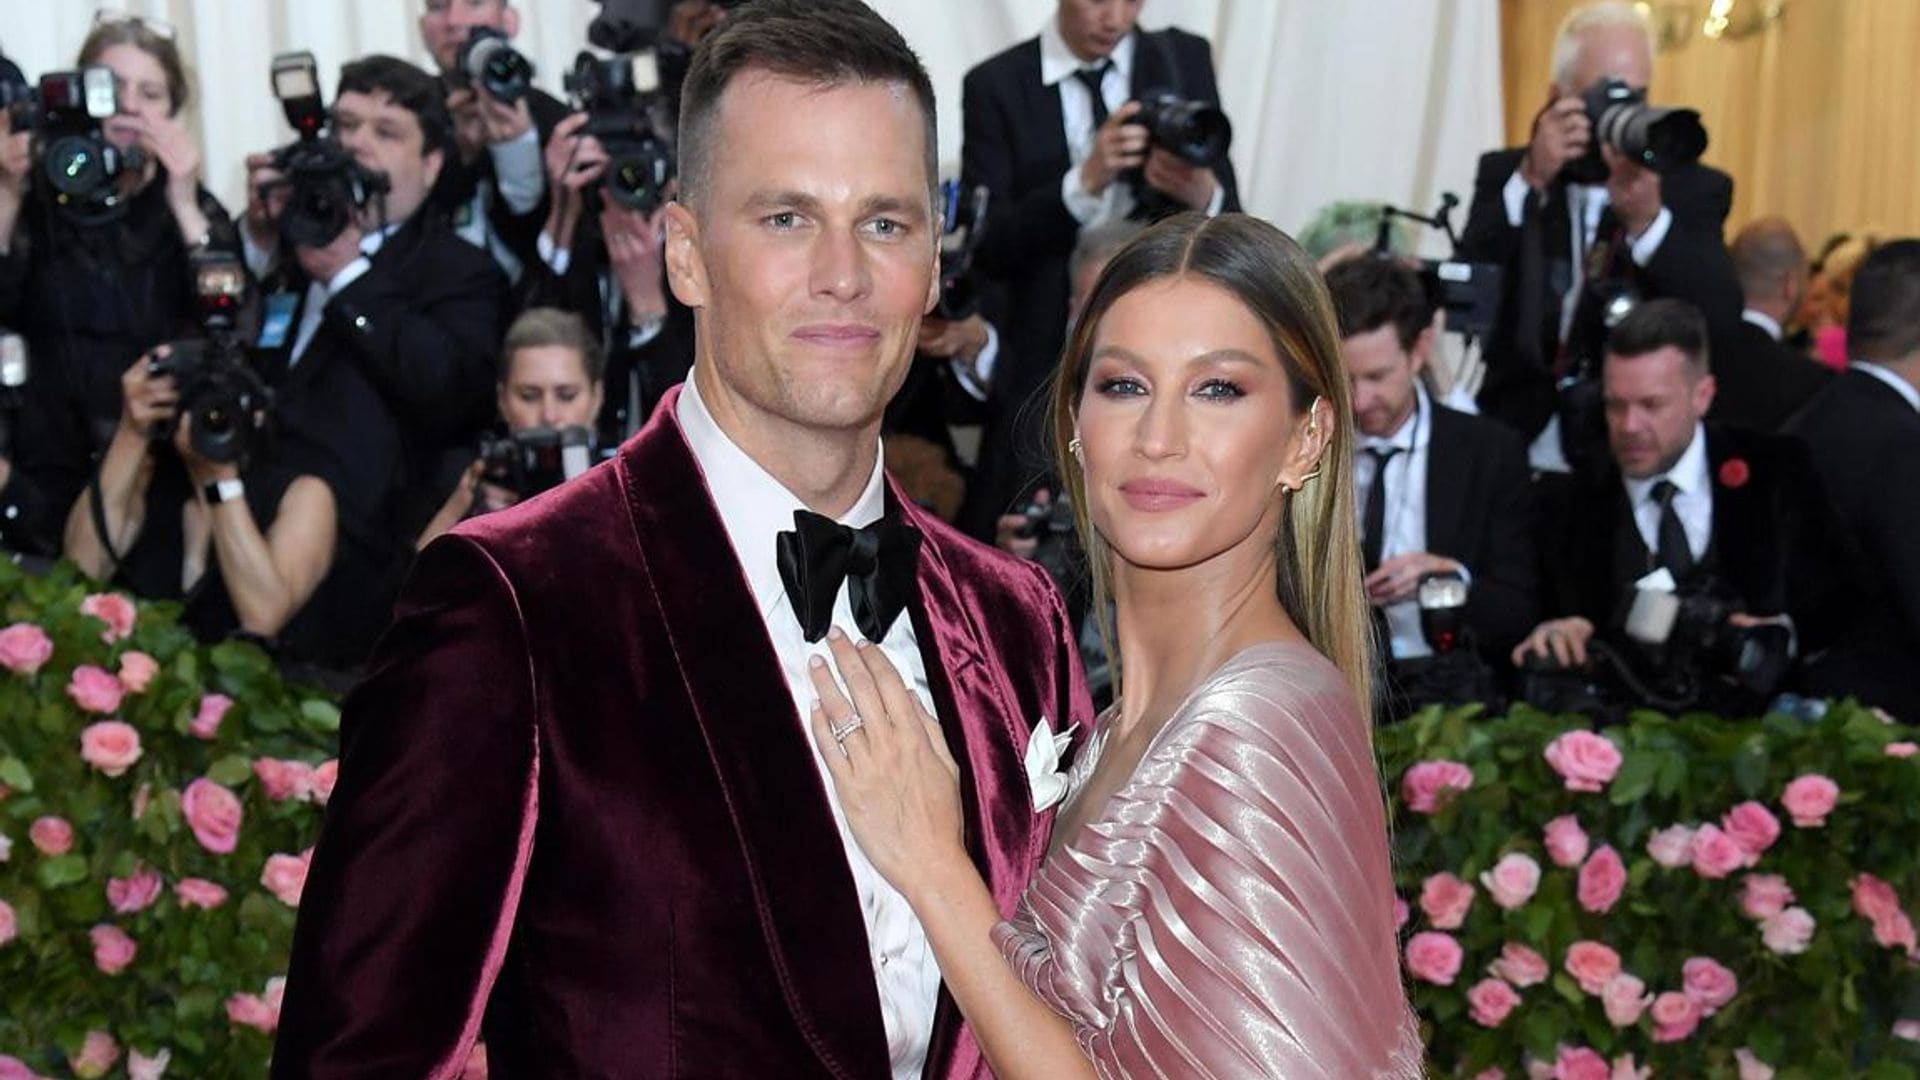 Tom Brady gets candid about how he and Gisele Bündchen overcame problems in their marriage